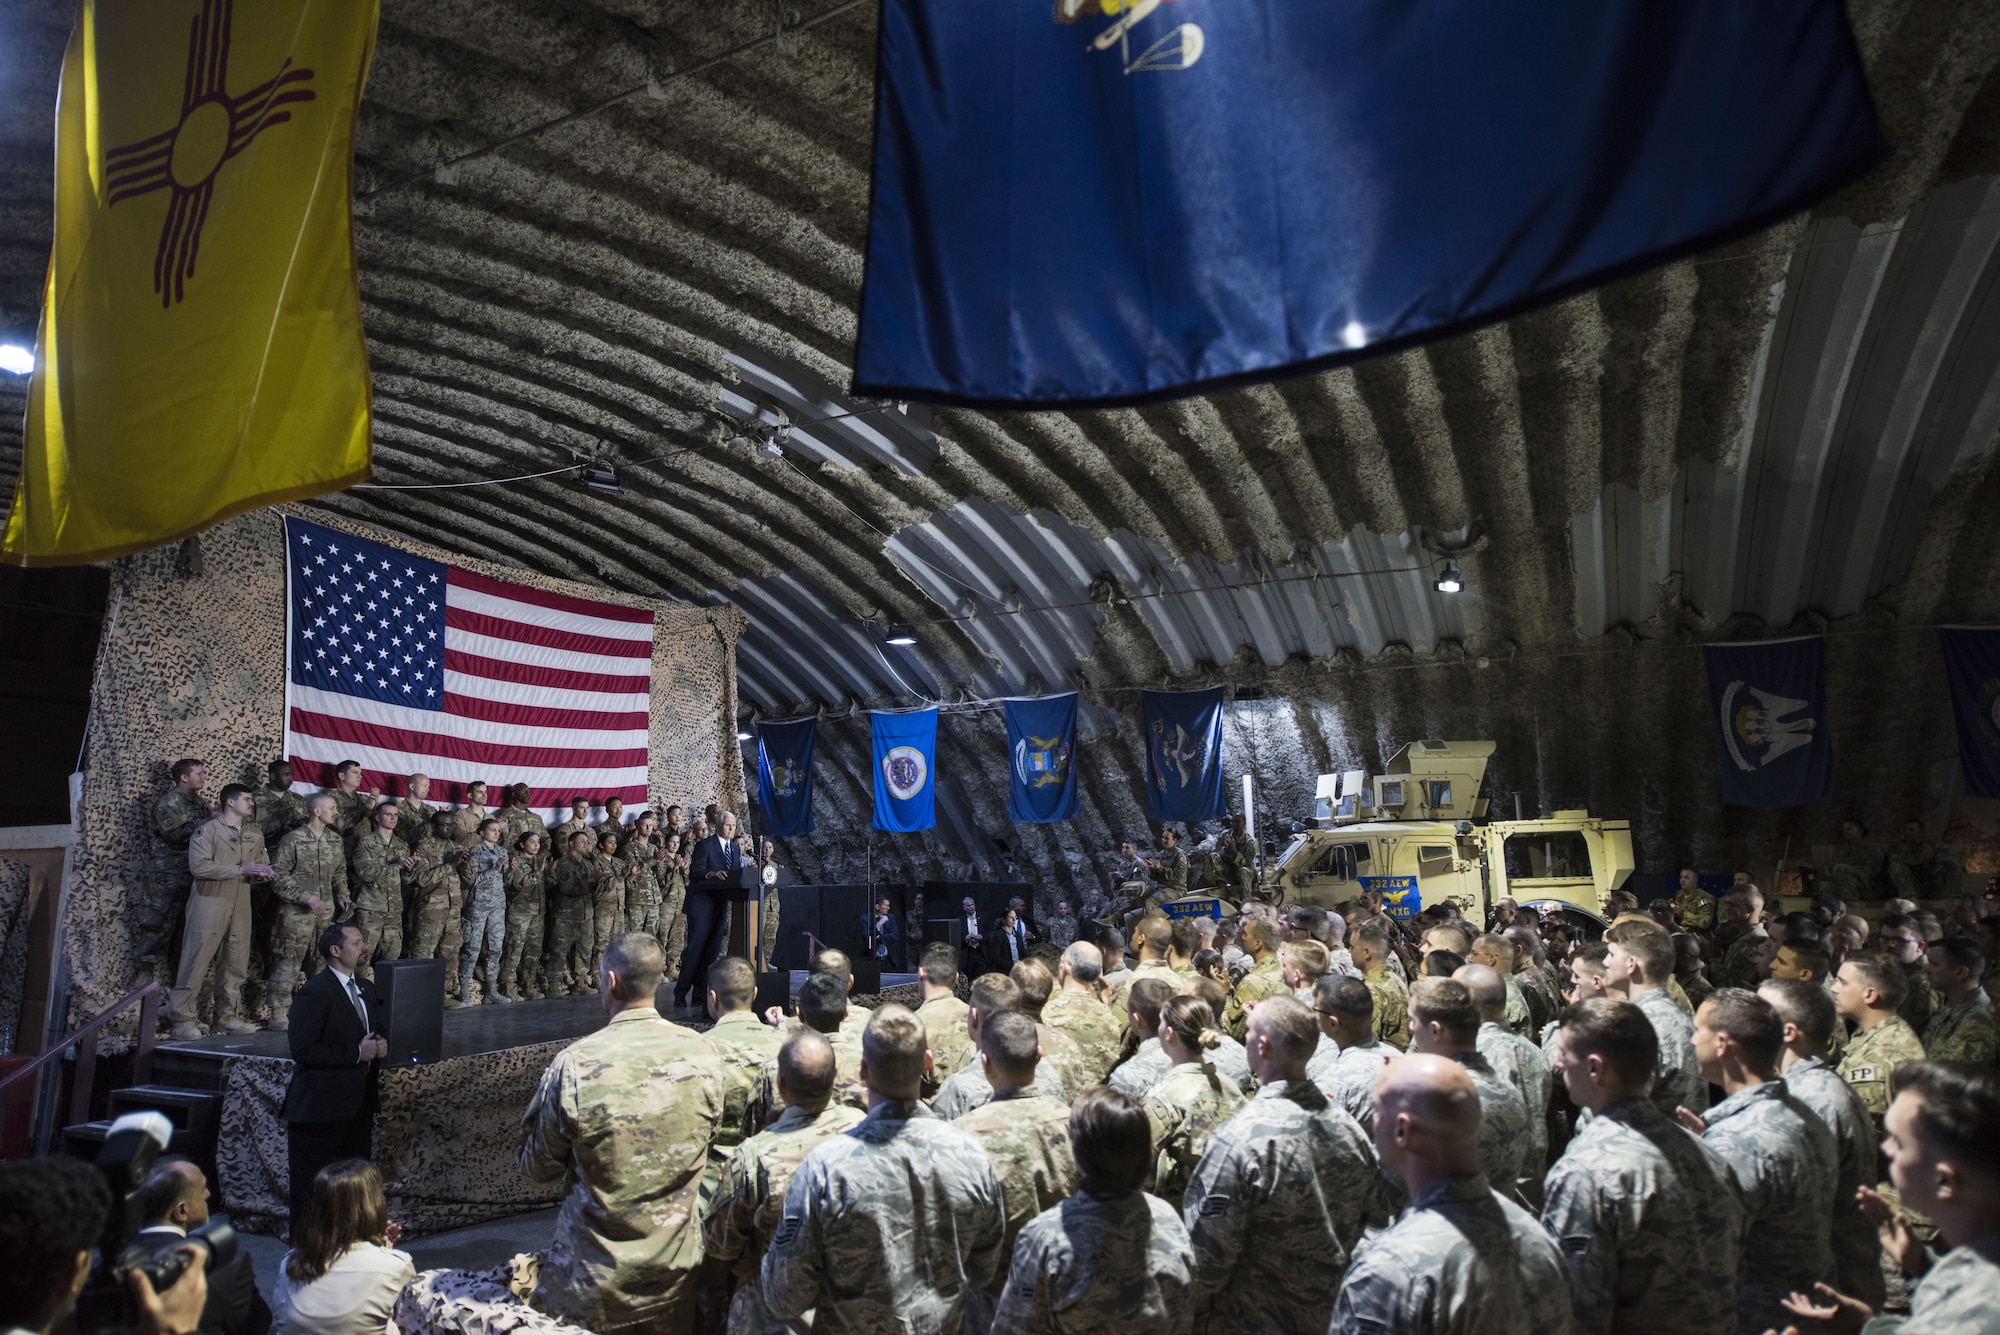 U.S. Vice President Mike Pence speaks to a crowd of deployed service members assigned to the 332d Air Expeditionary Wing January 21, 2018 at an undisclosed location in Southwest Asia. During his speech, Pence praised the wing’s continued dedication to the production of unrivaled airpower and reaffirmed the administration’s efforts to end the current government shutdown. (U.S. Air Force photo by Staff Sgt. Joshua Kleinholz)